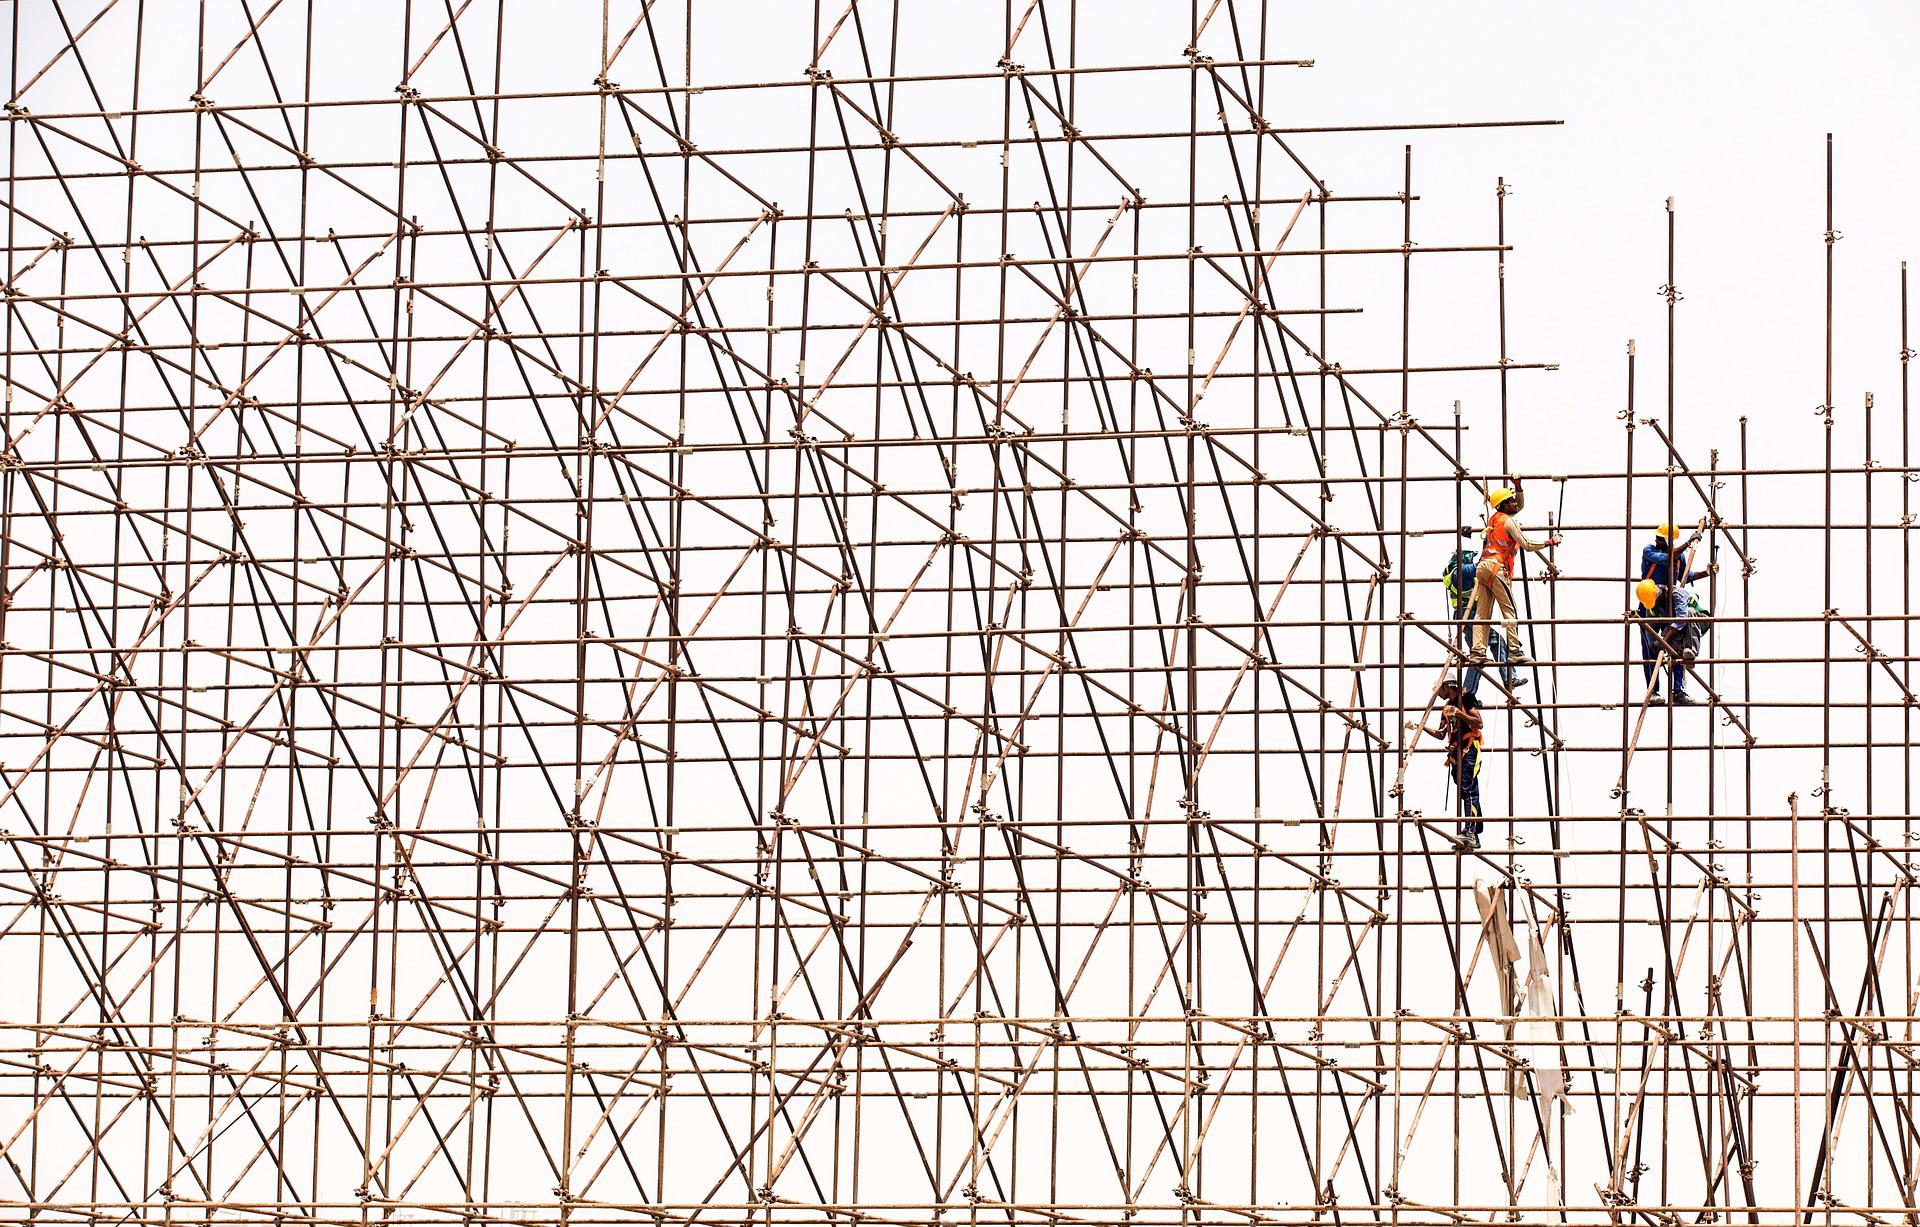 What details need to be paid attention to when building scaffolding